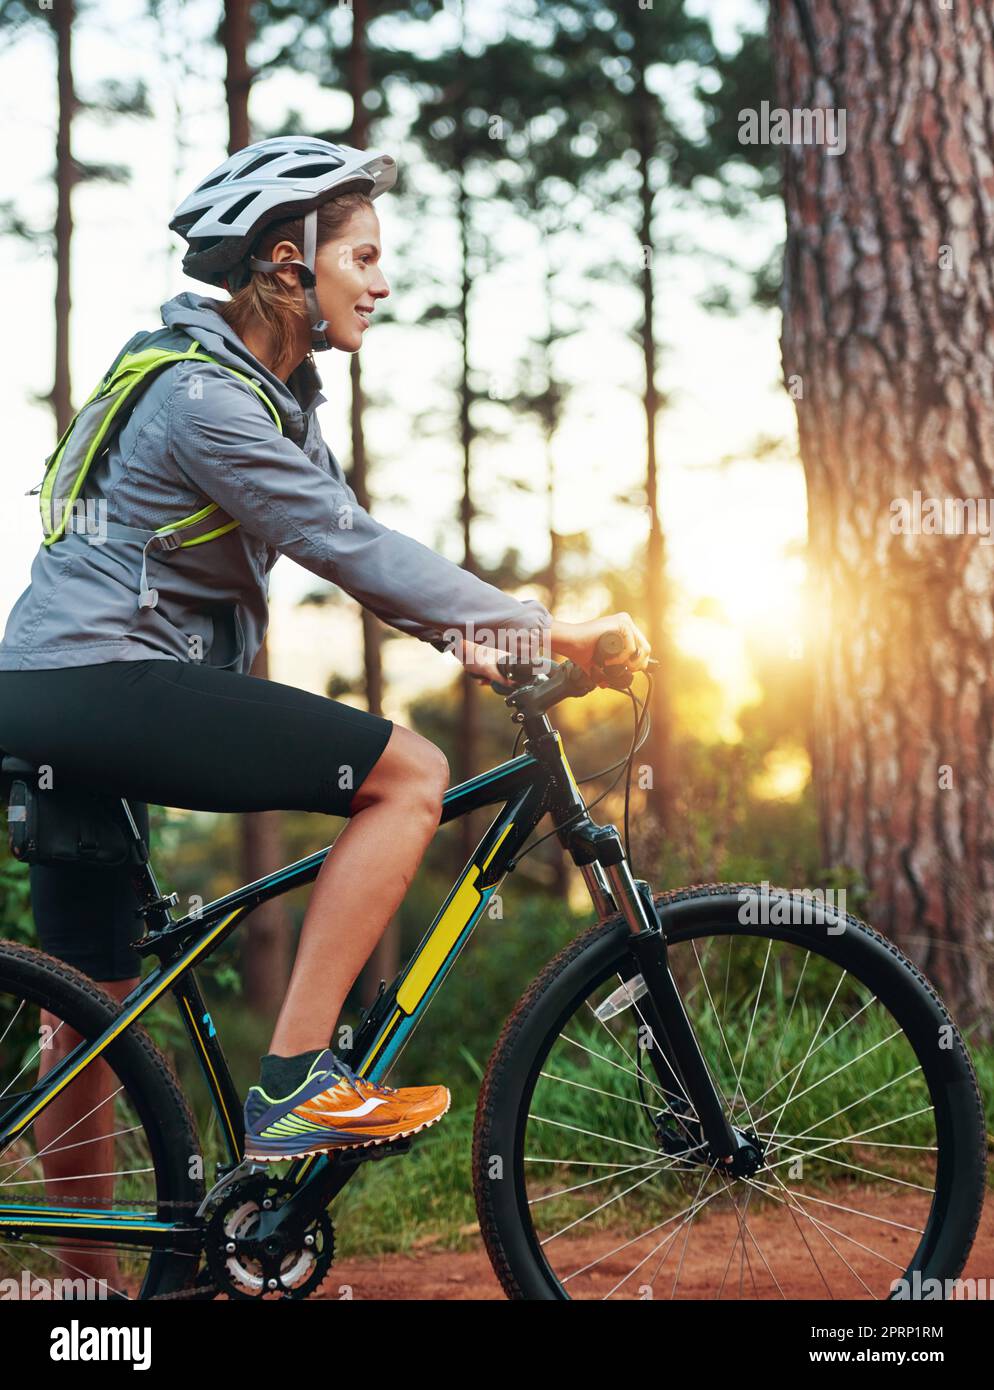 Taking her bike along the trails. a female mountain biker out for an early morning ride. Stock Photo